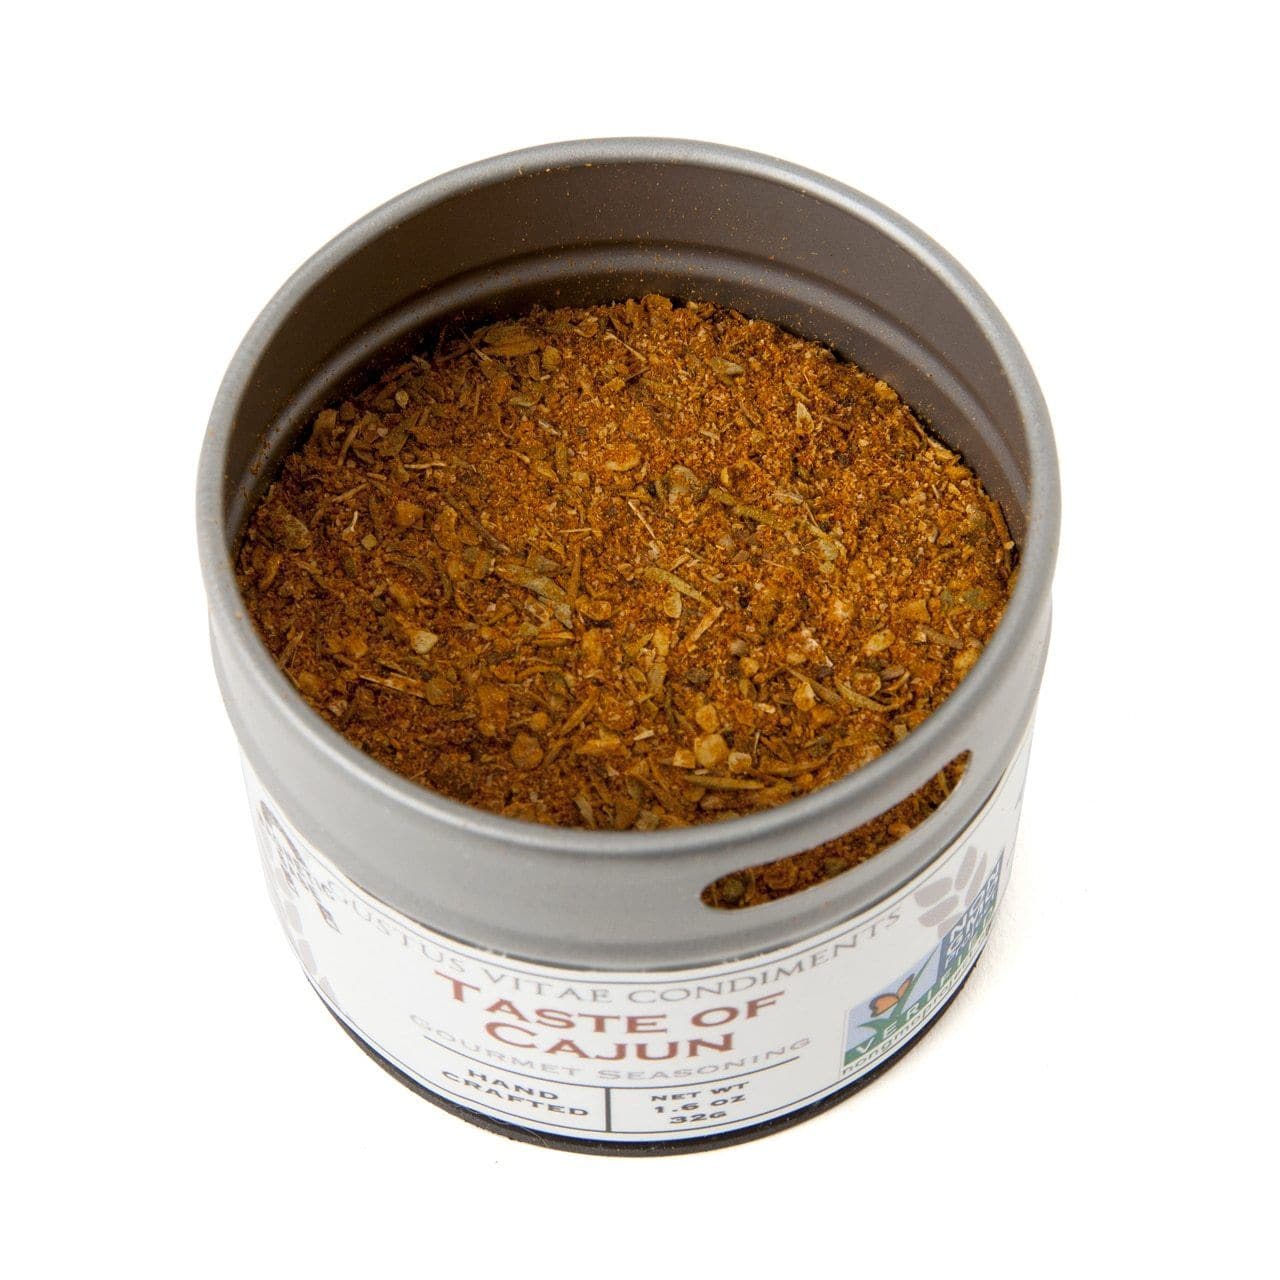 Gift-Fiery Flavors Gourmet Seasoning and Rub Collection I 3 pc.